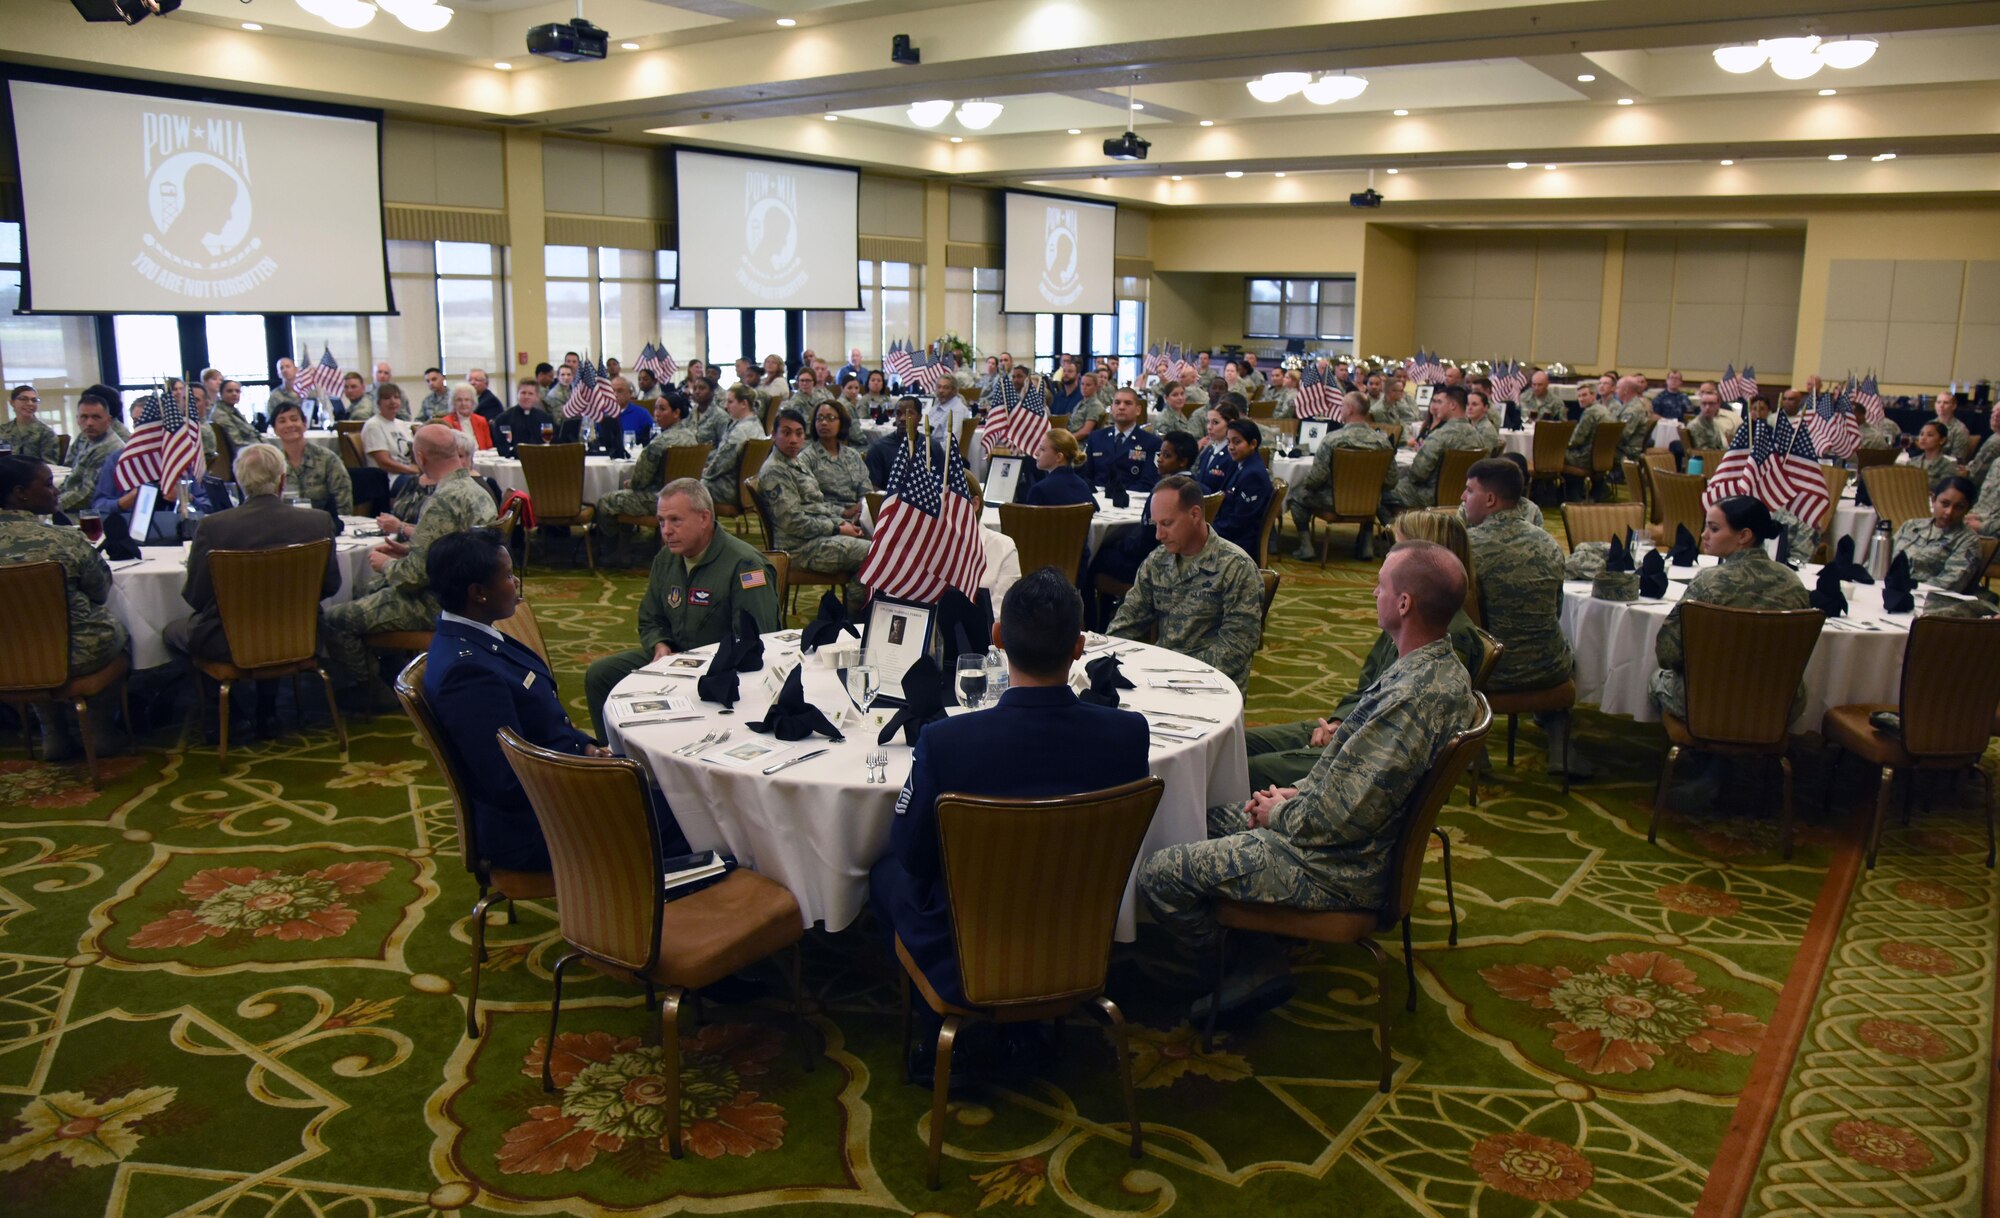 Keesler personnel attend a POW/MIA Remembrance Luncheon at the Bay Breeze Event Center Sept. 13, 2017, on Keesler Air Force Base, Miss. The event, hosted by the Air Force Sergeants Association, was held to raise awareness and pay tribute to all prisoners of war and military members still missing in action. (U.S. Air Force photo by Kemberly Groue)